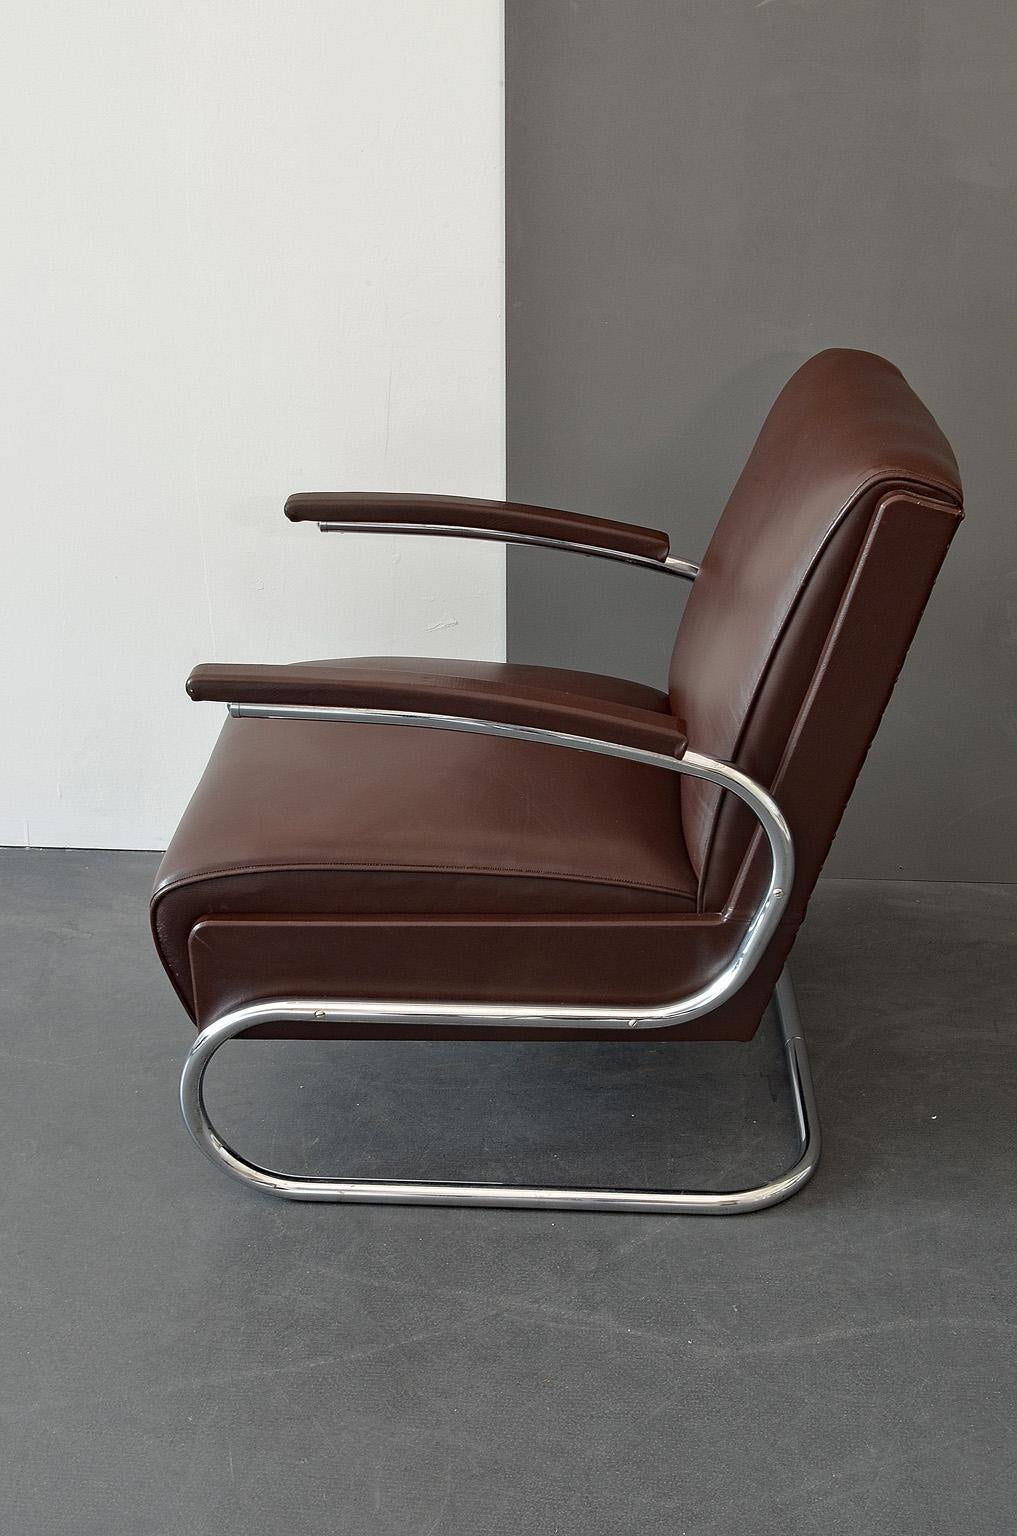 Armchair or cantilever tubular steel brown leather from Mücke Melder, 1930s.
New leather upholstery.